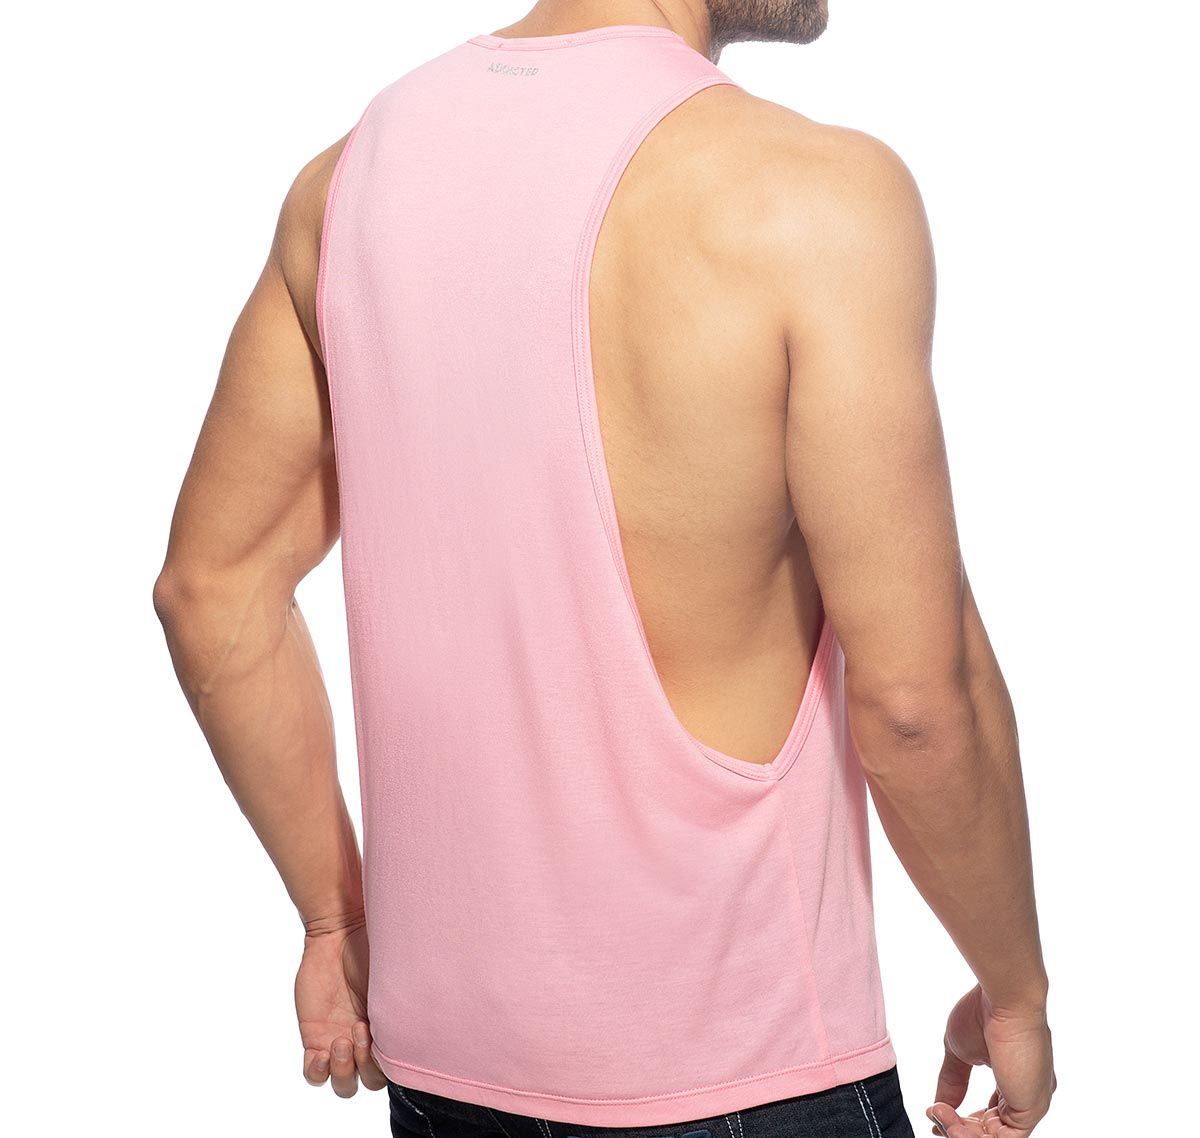 Addicted Tank Top AD LOW RIDER AD043, roze